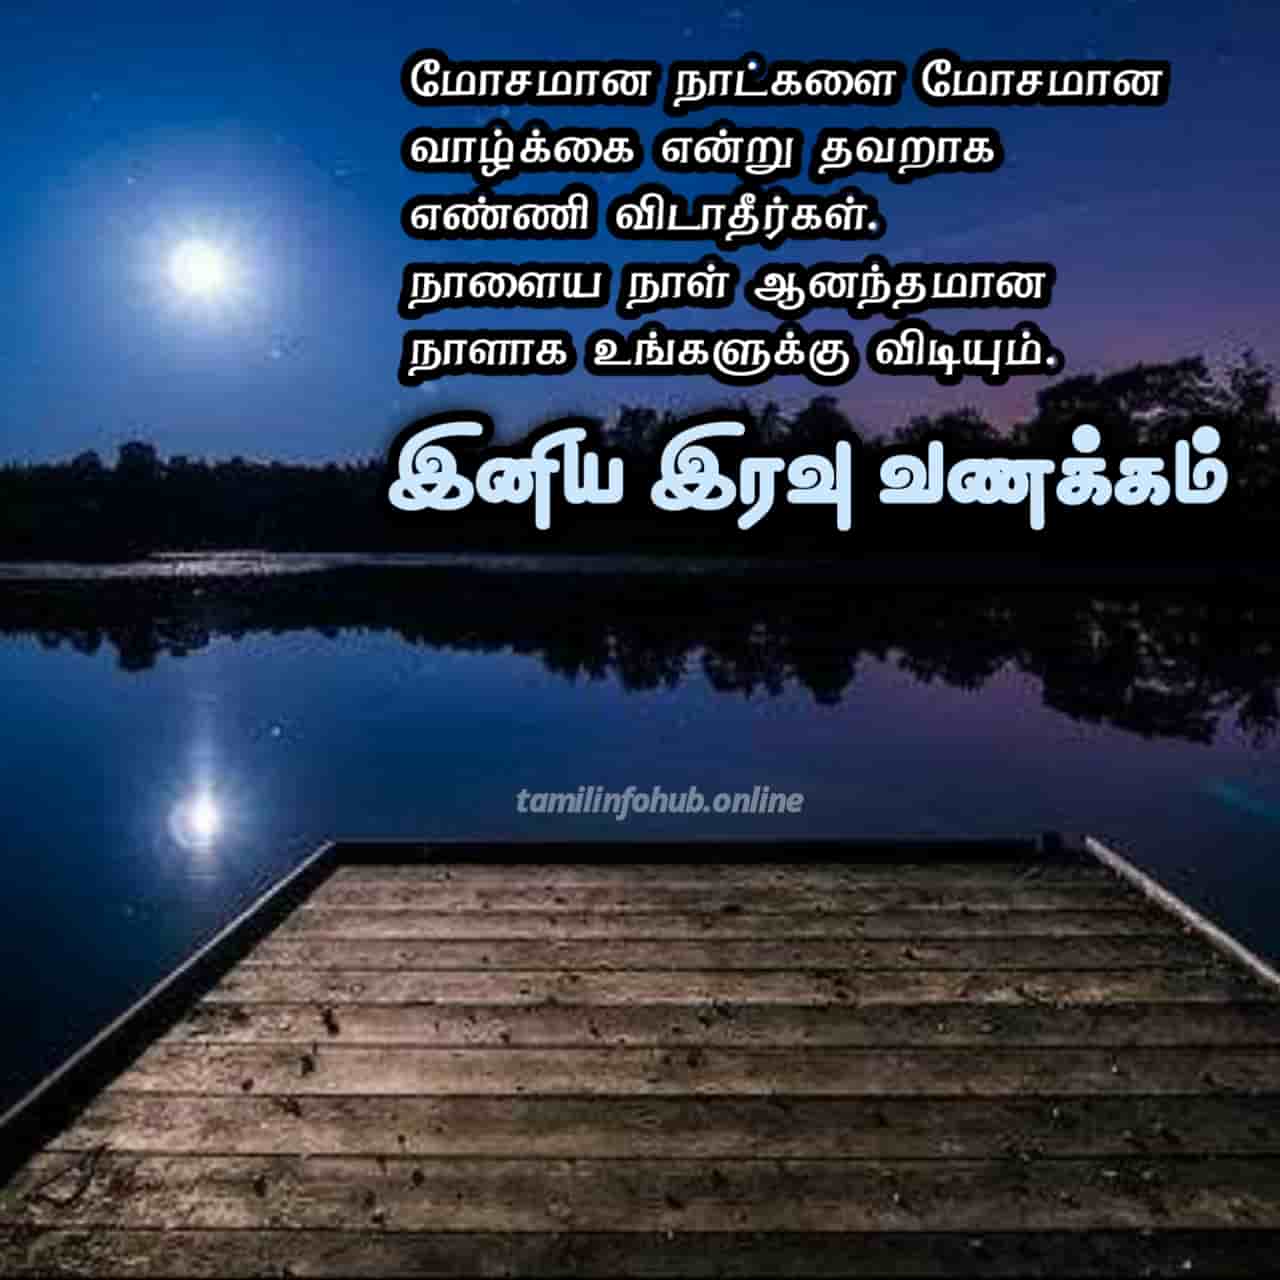 Good Night in Tamil Images,Quotes,SMS,Kavithai,Status